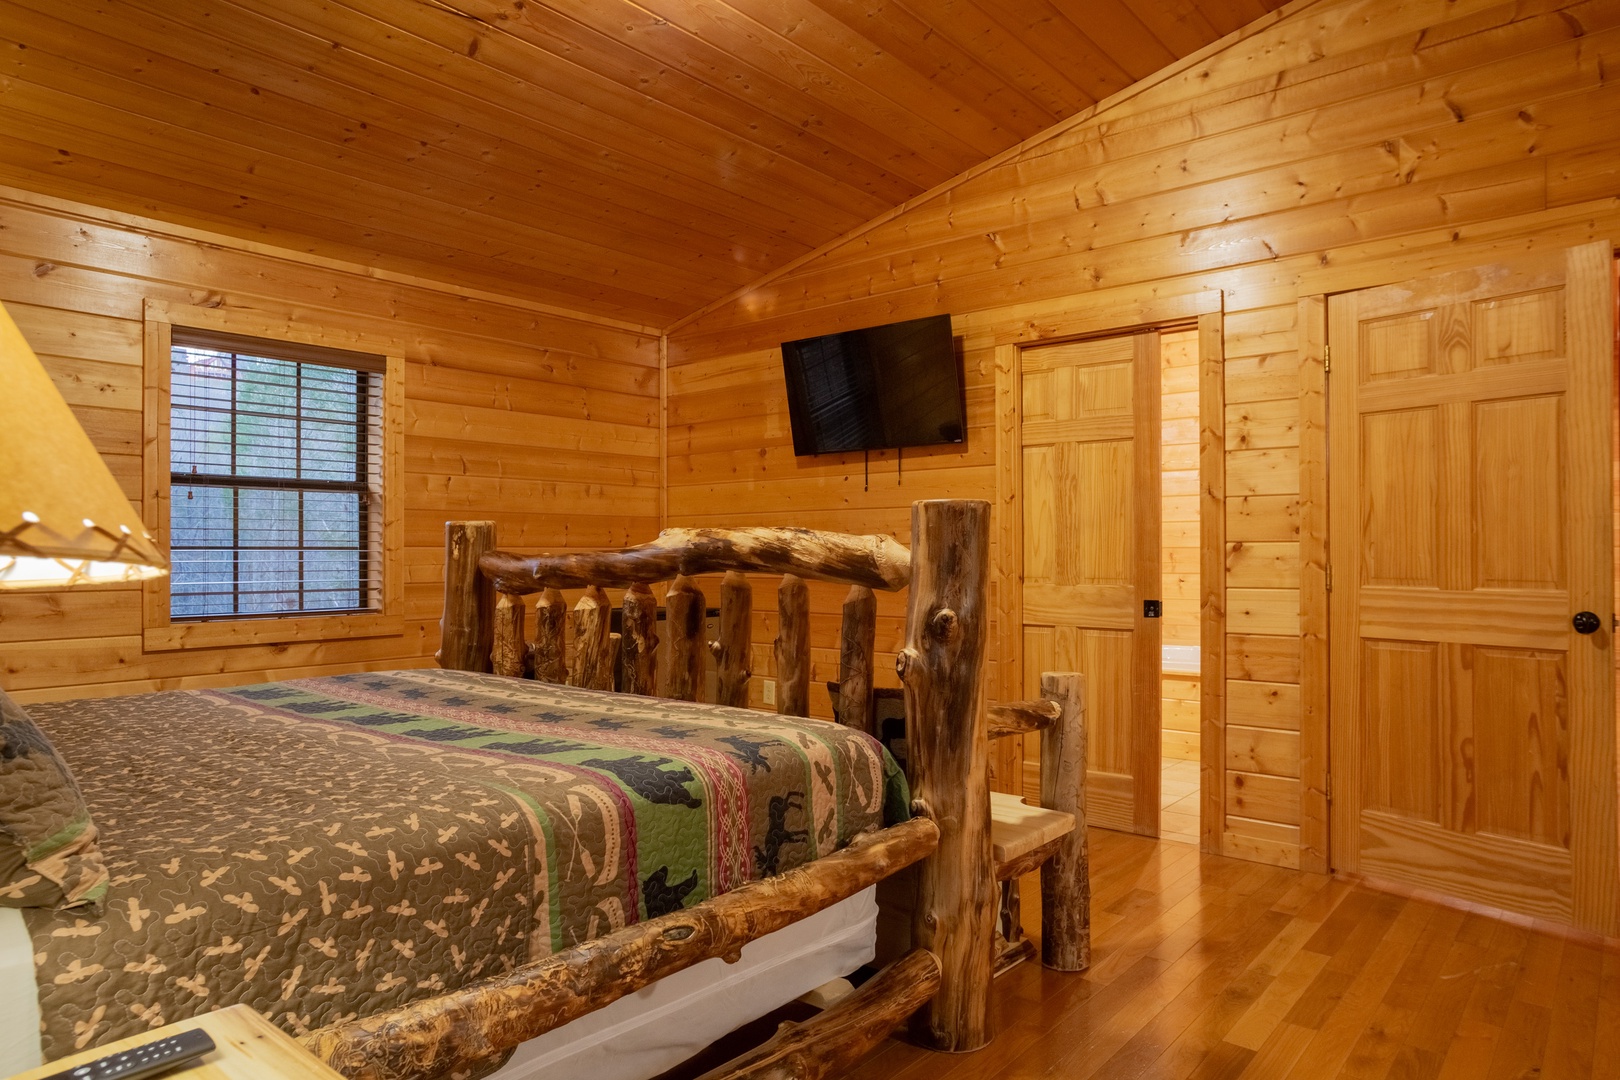 Bedroom Flat Screen TV at 3 Crazy Cubs, a 5 bedroom cabin rental located in pigeon forge